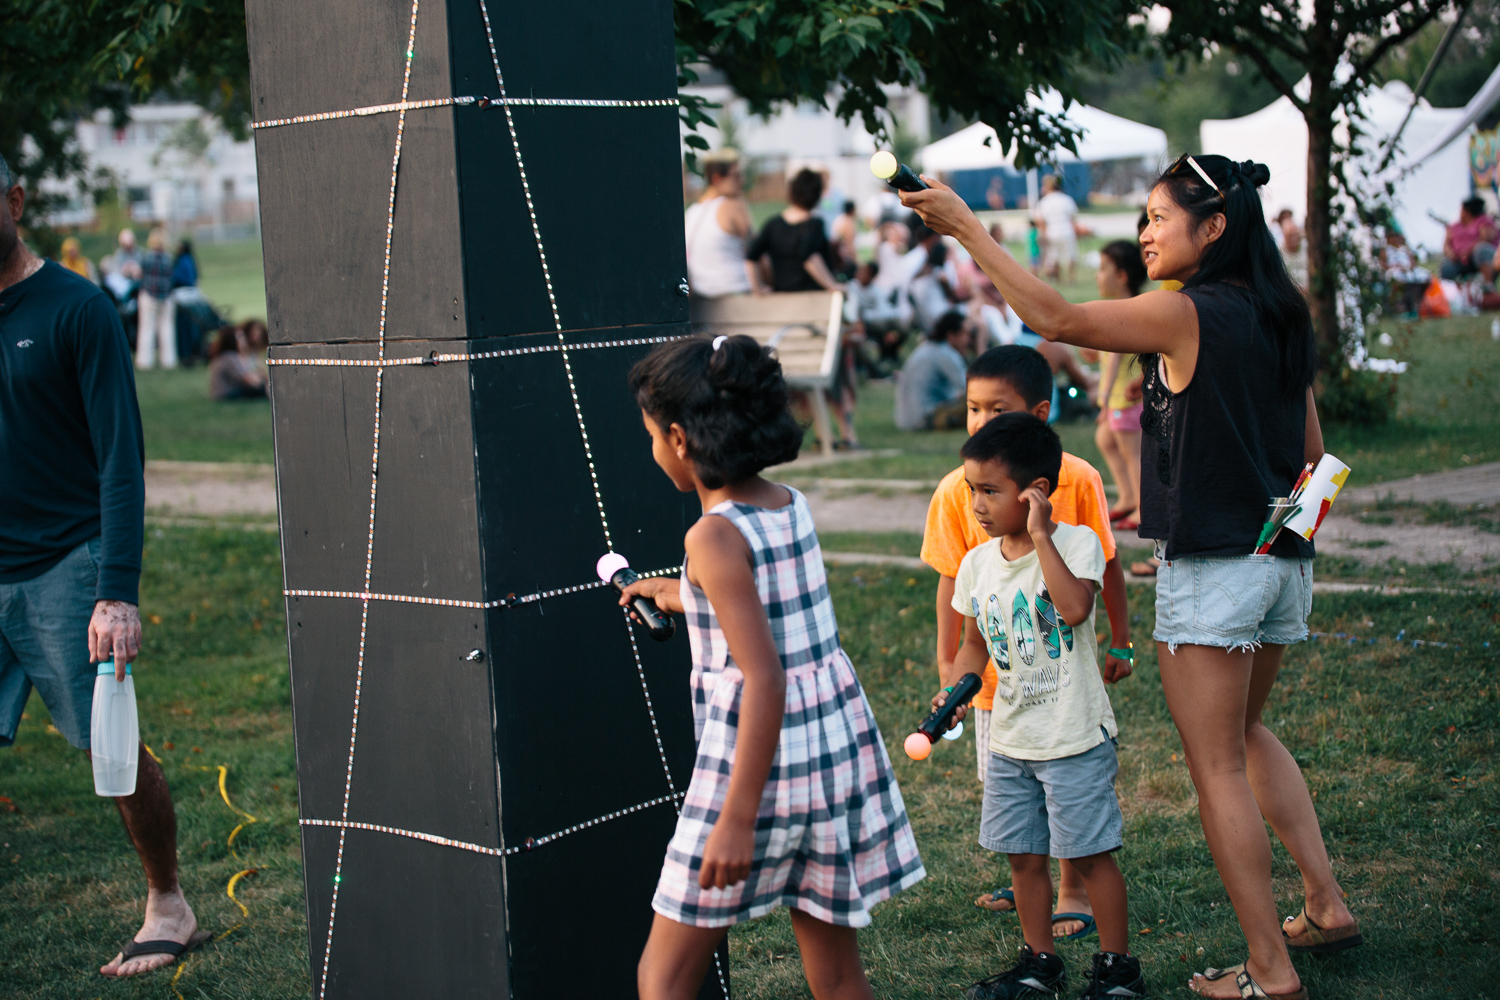 A group of children interact with a large black rectangular sculpture display